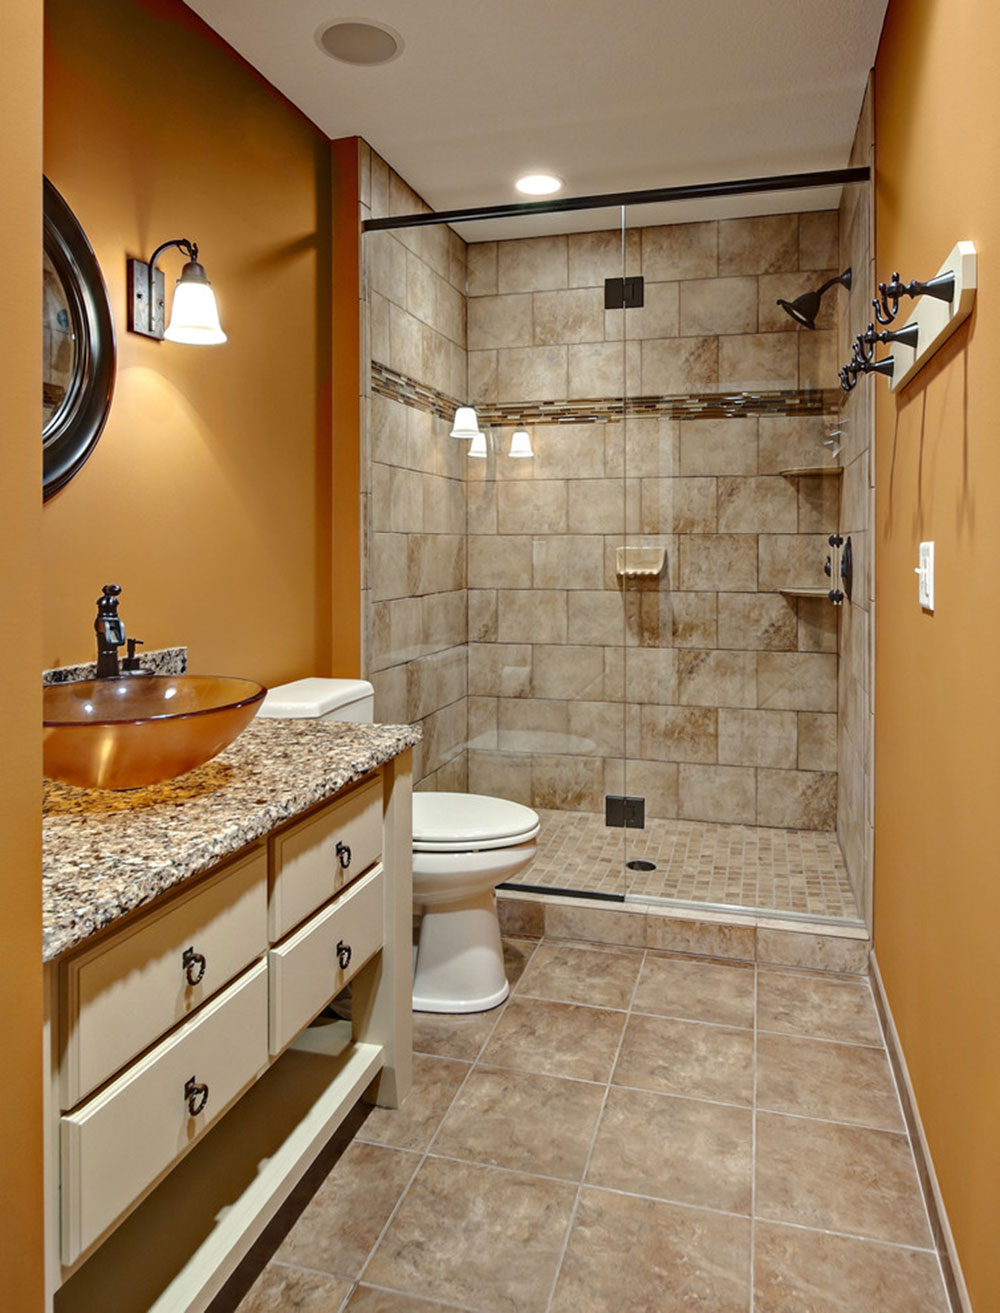 Bathroom-by-Knight-Construction-Design-Inc How much does it cost to add a bathroom in the basement?  (Replied)